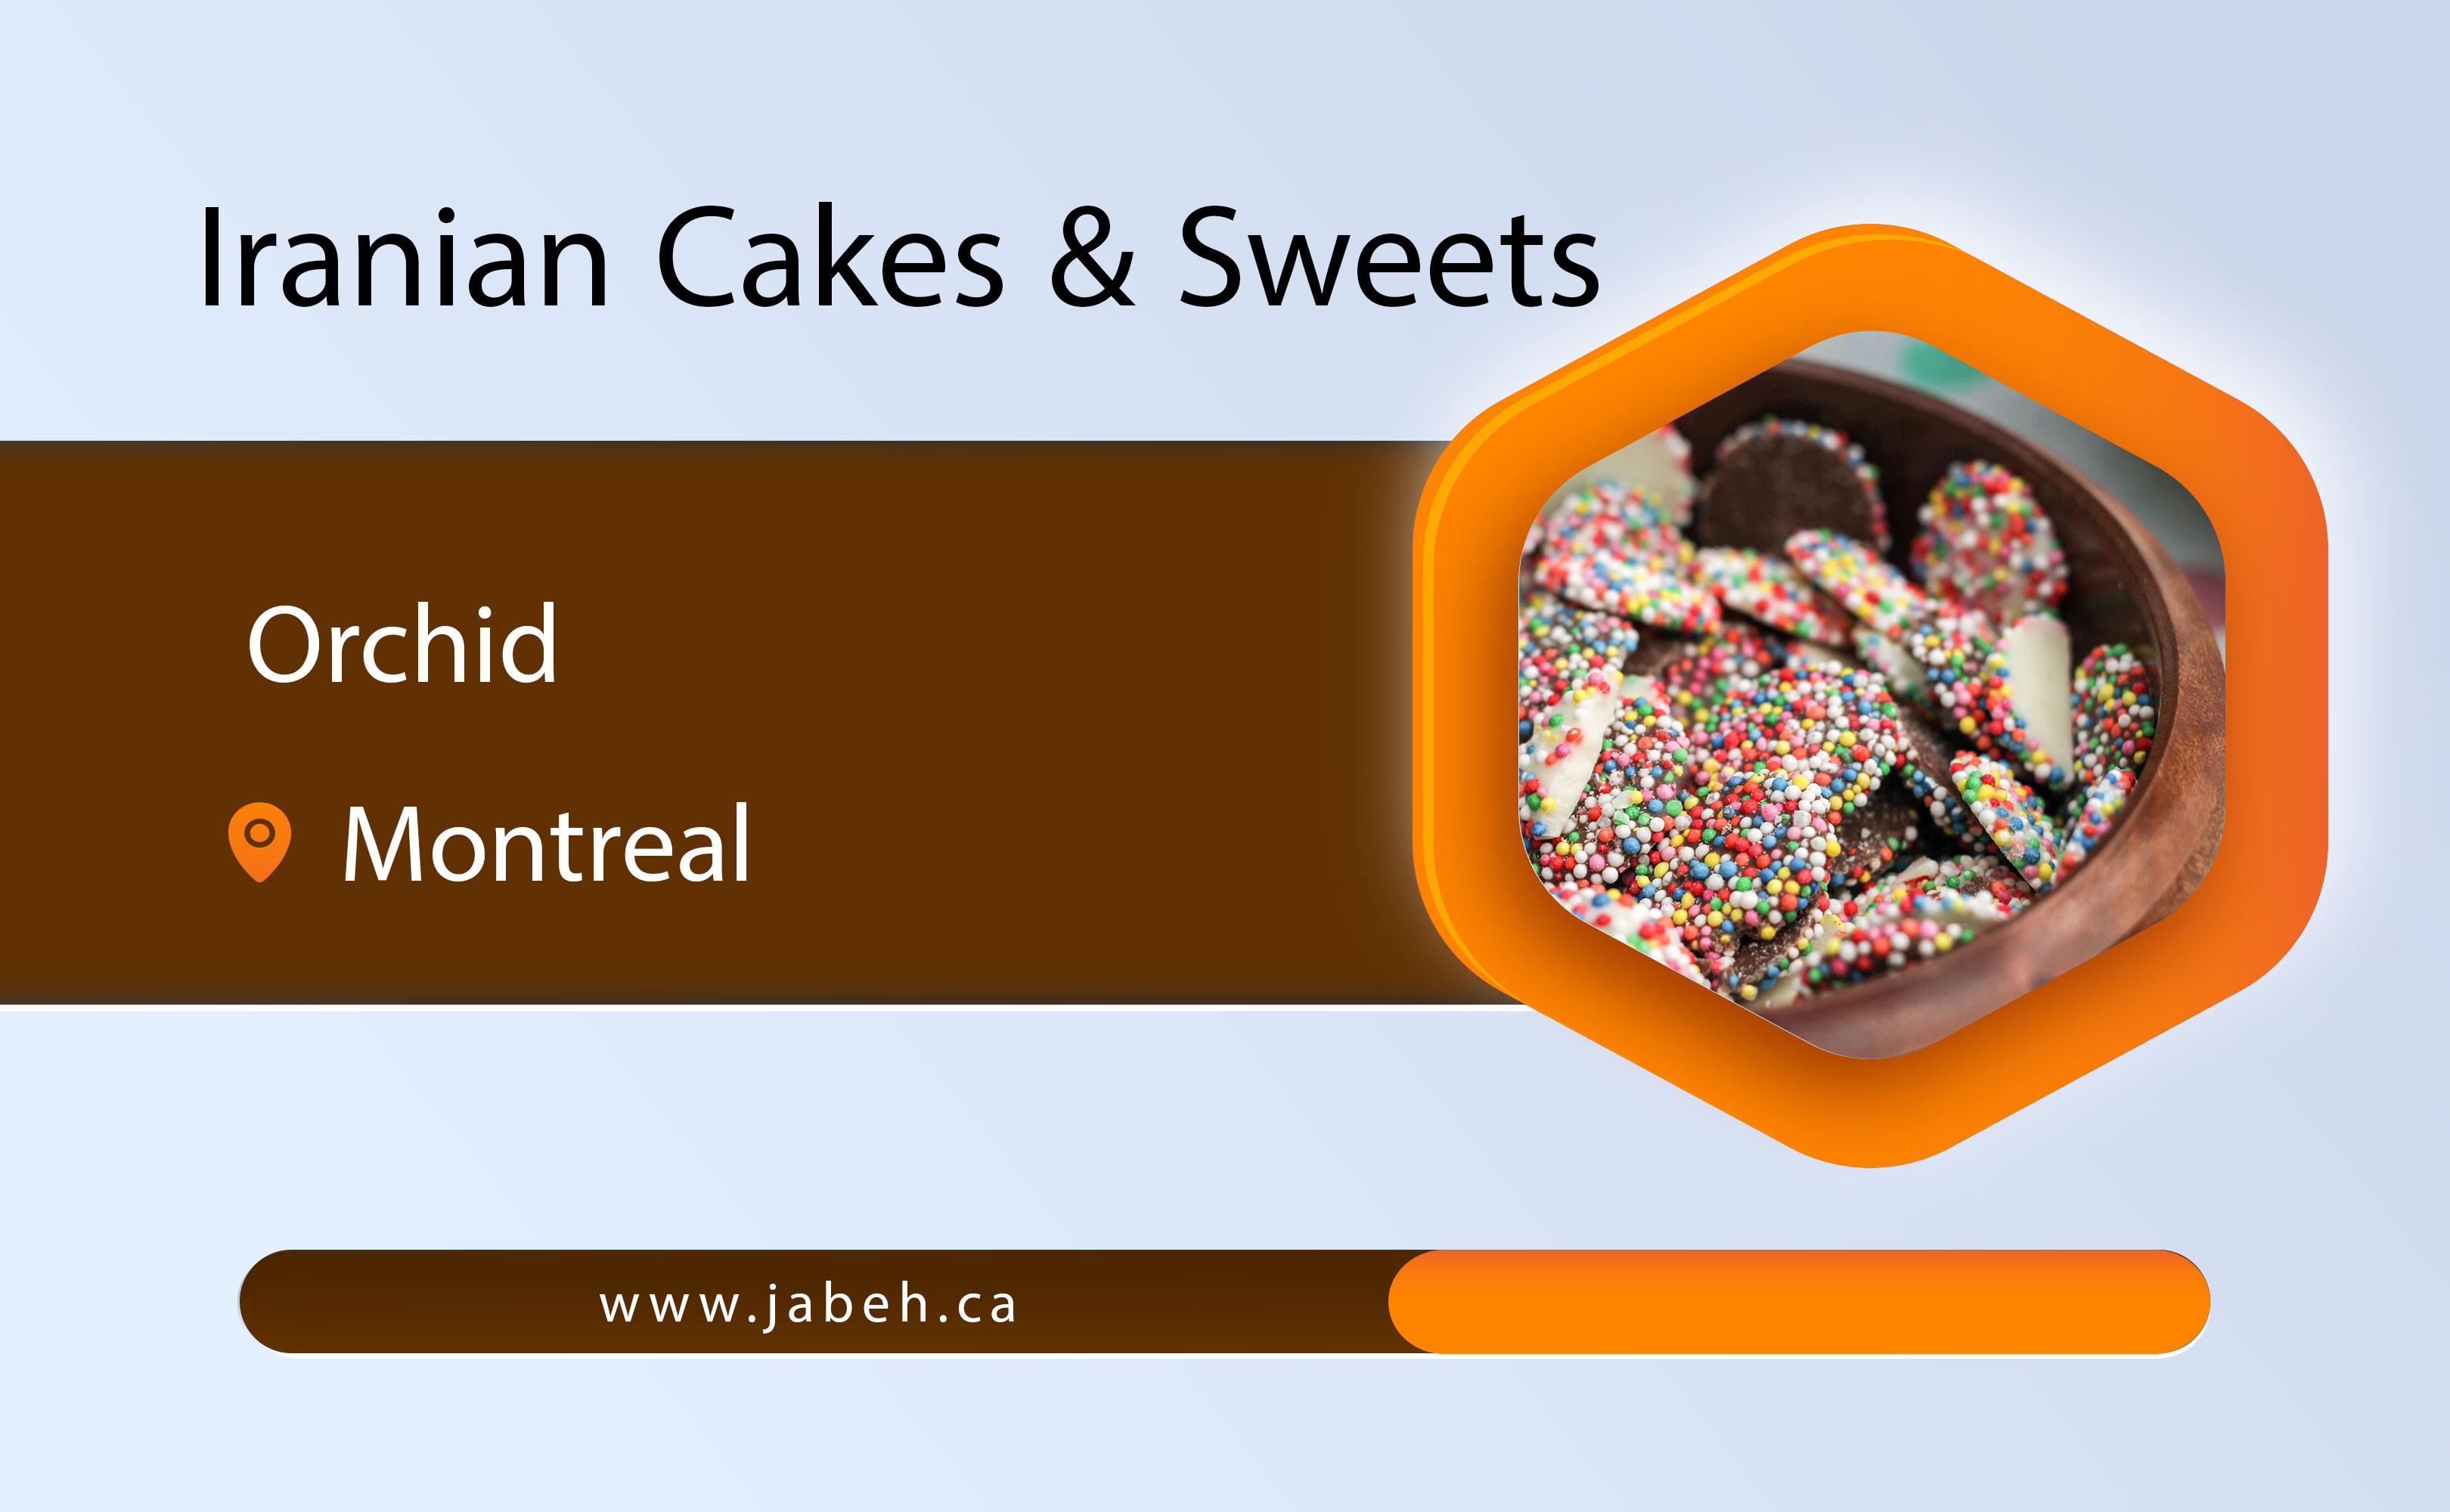 Iranian orchid cakes and sweets in Montreal